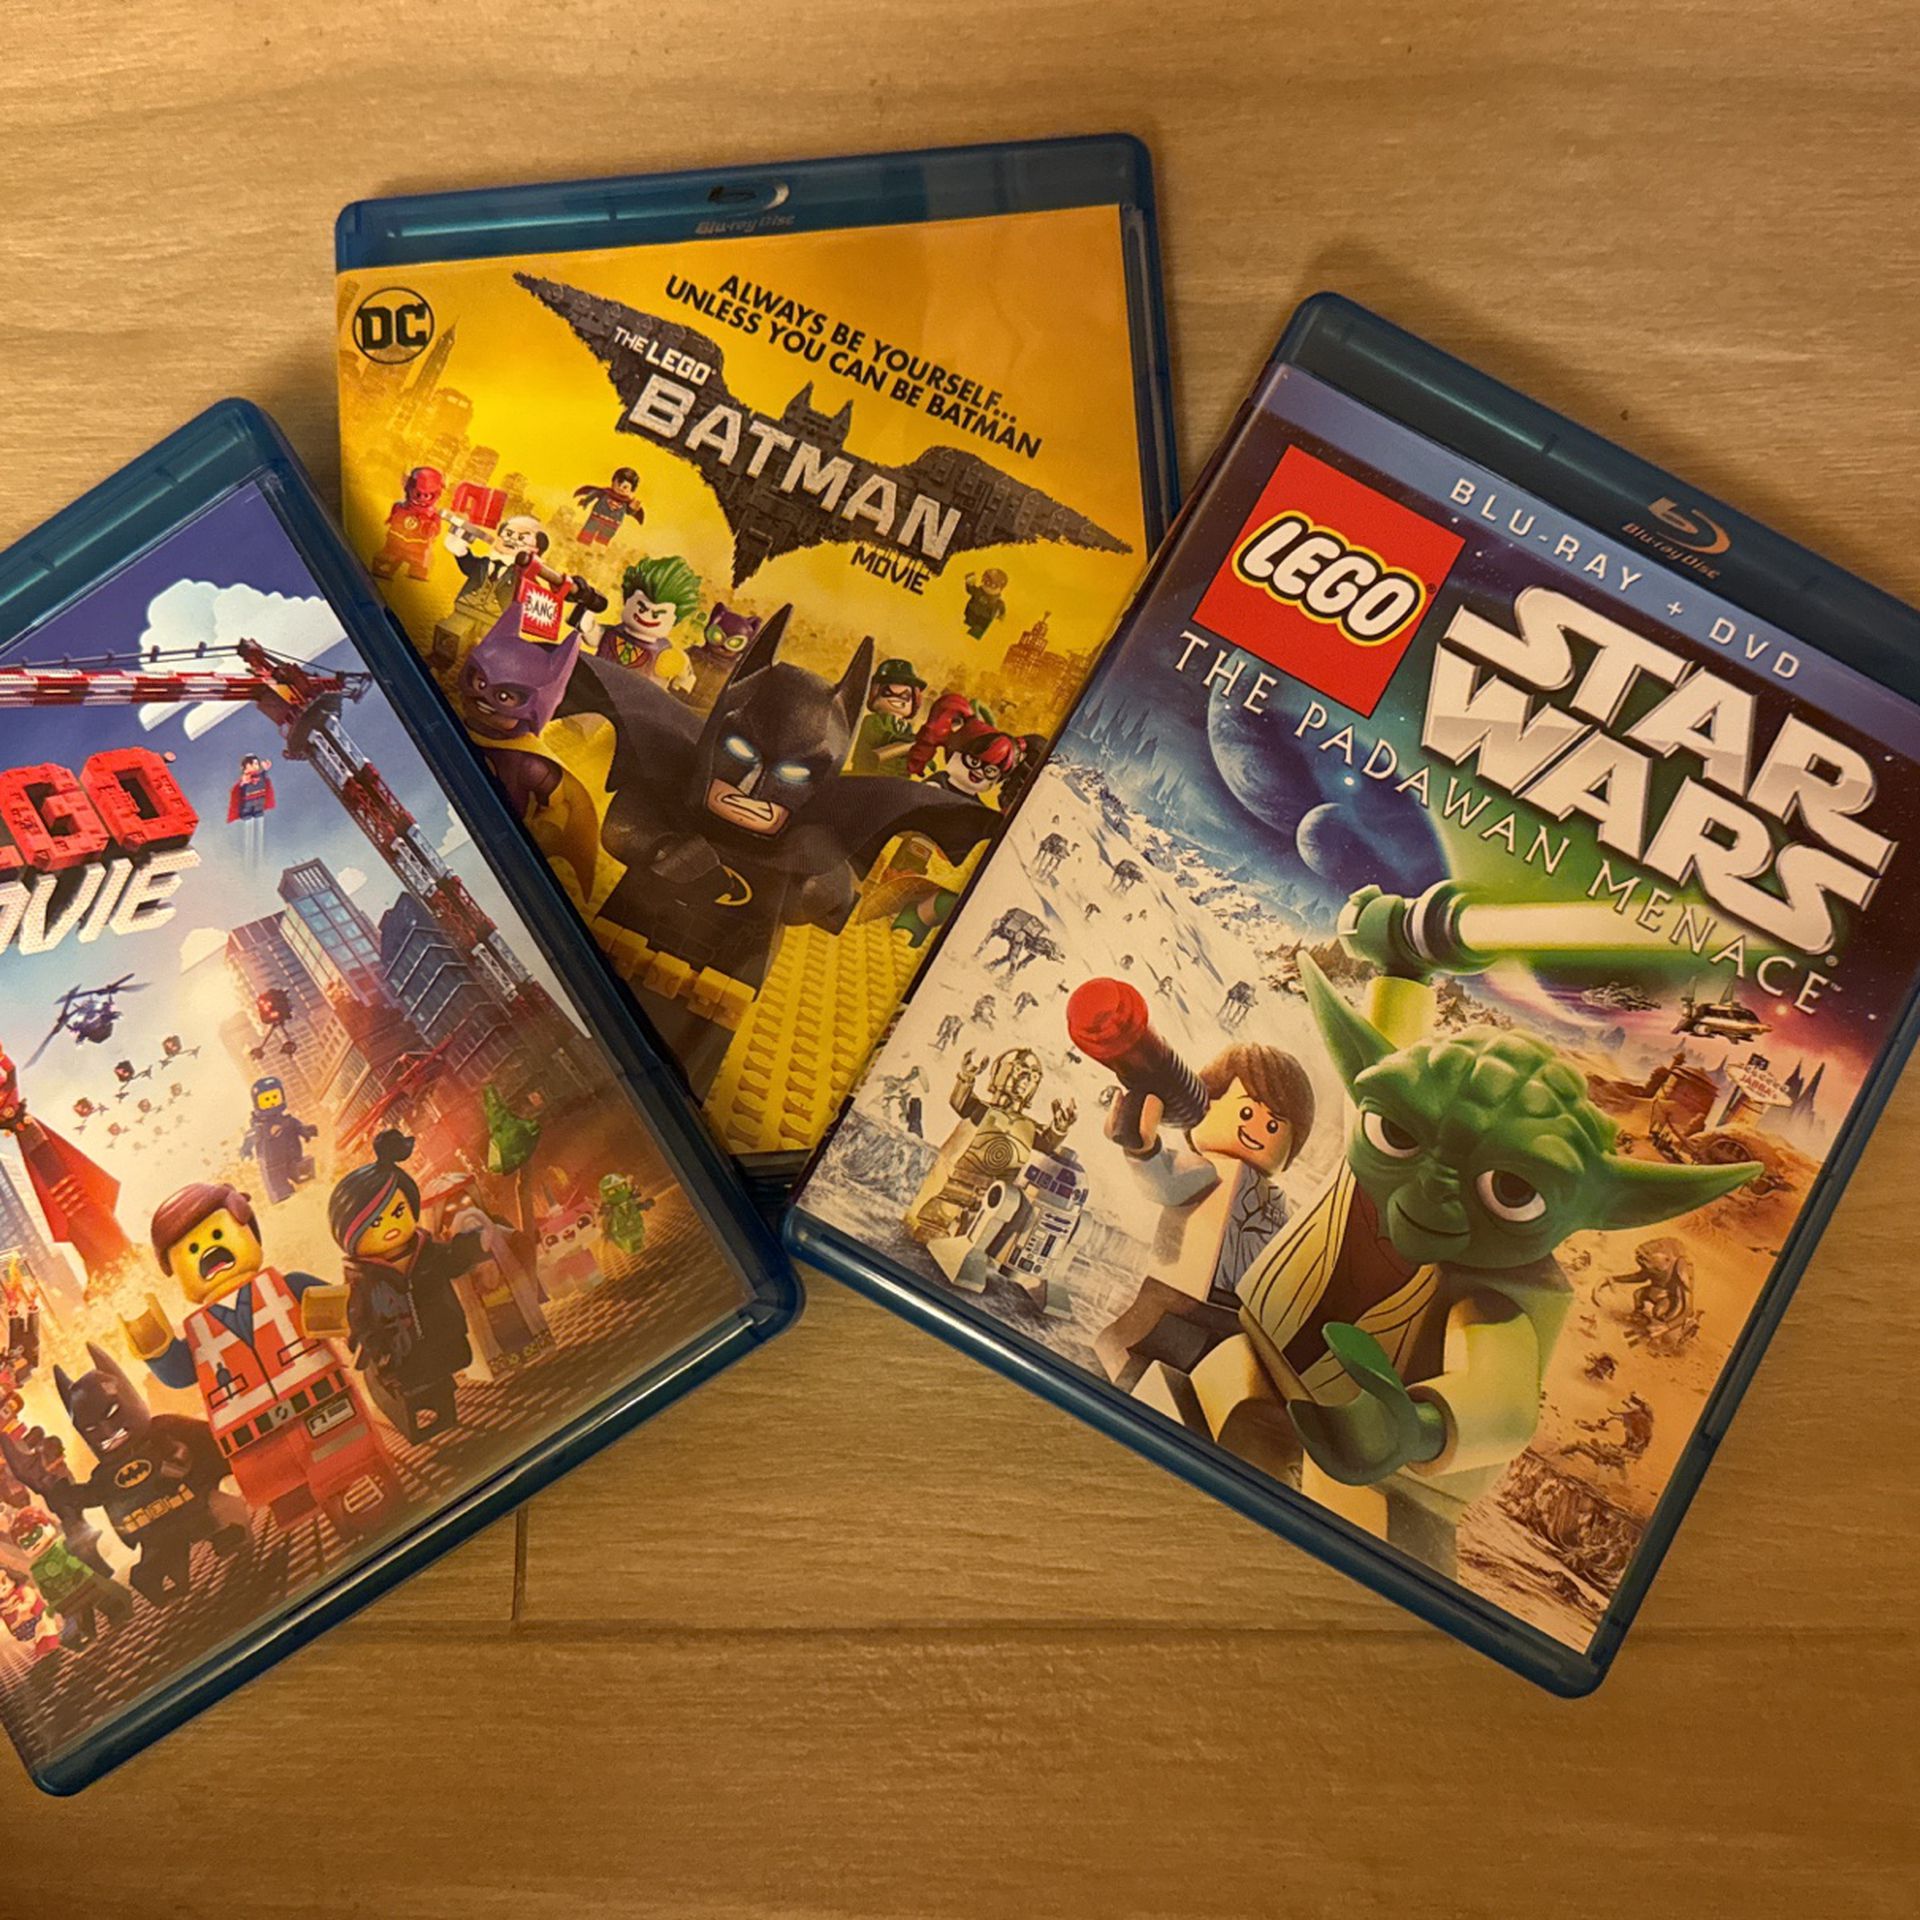 3 Pack Lego Movies On Blu-Ray